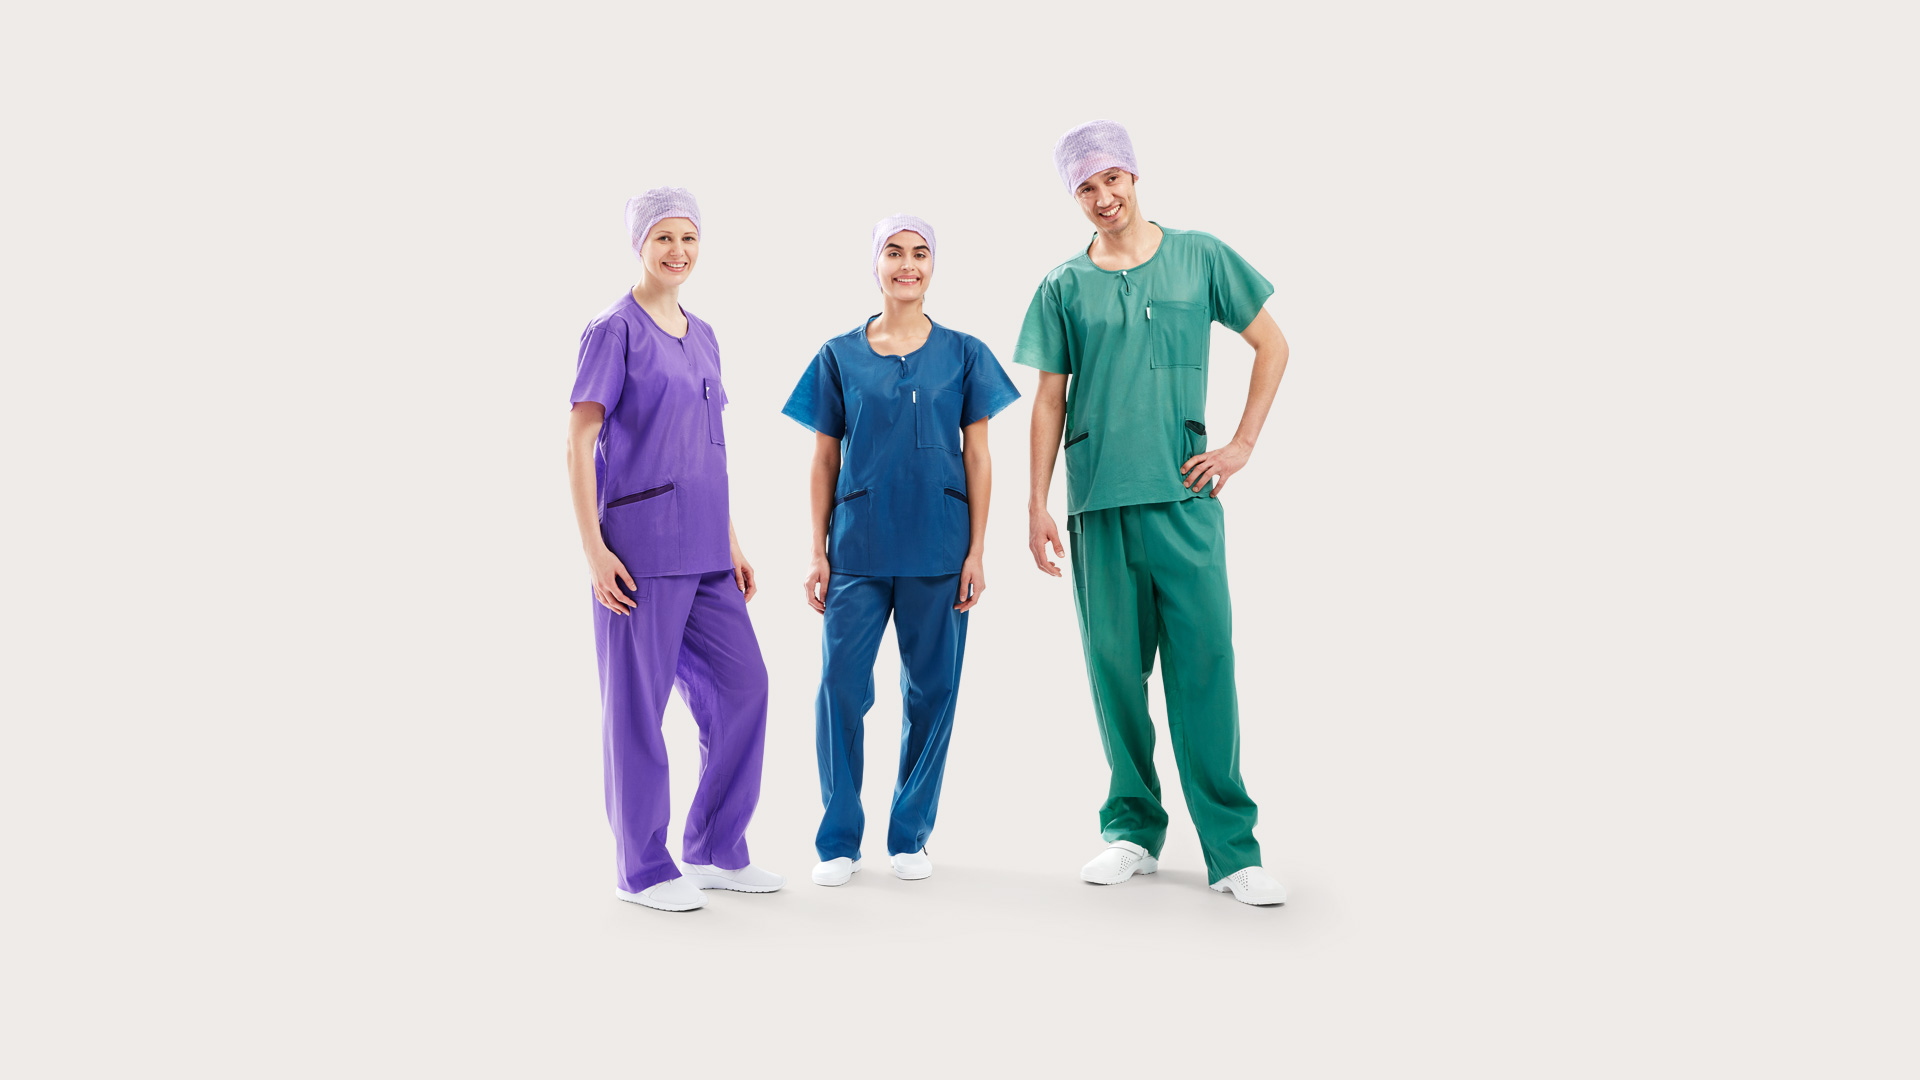 Medical Scrubs Products, Supplies and Equipment